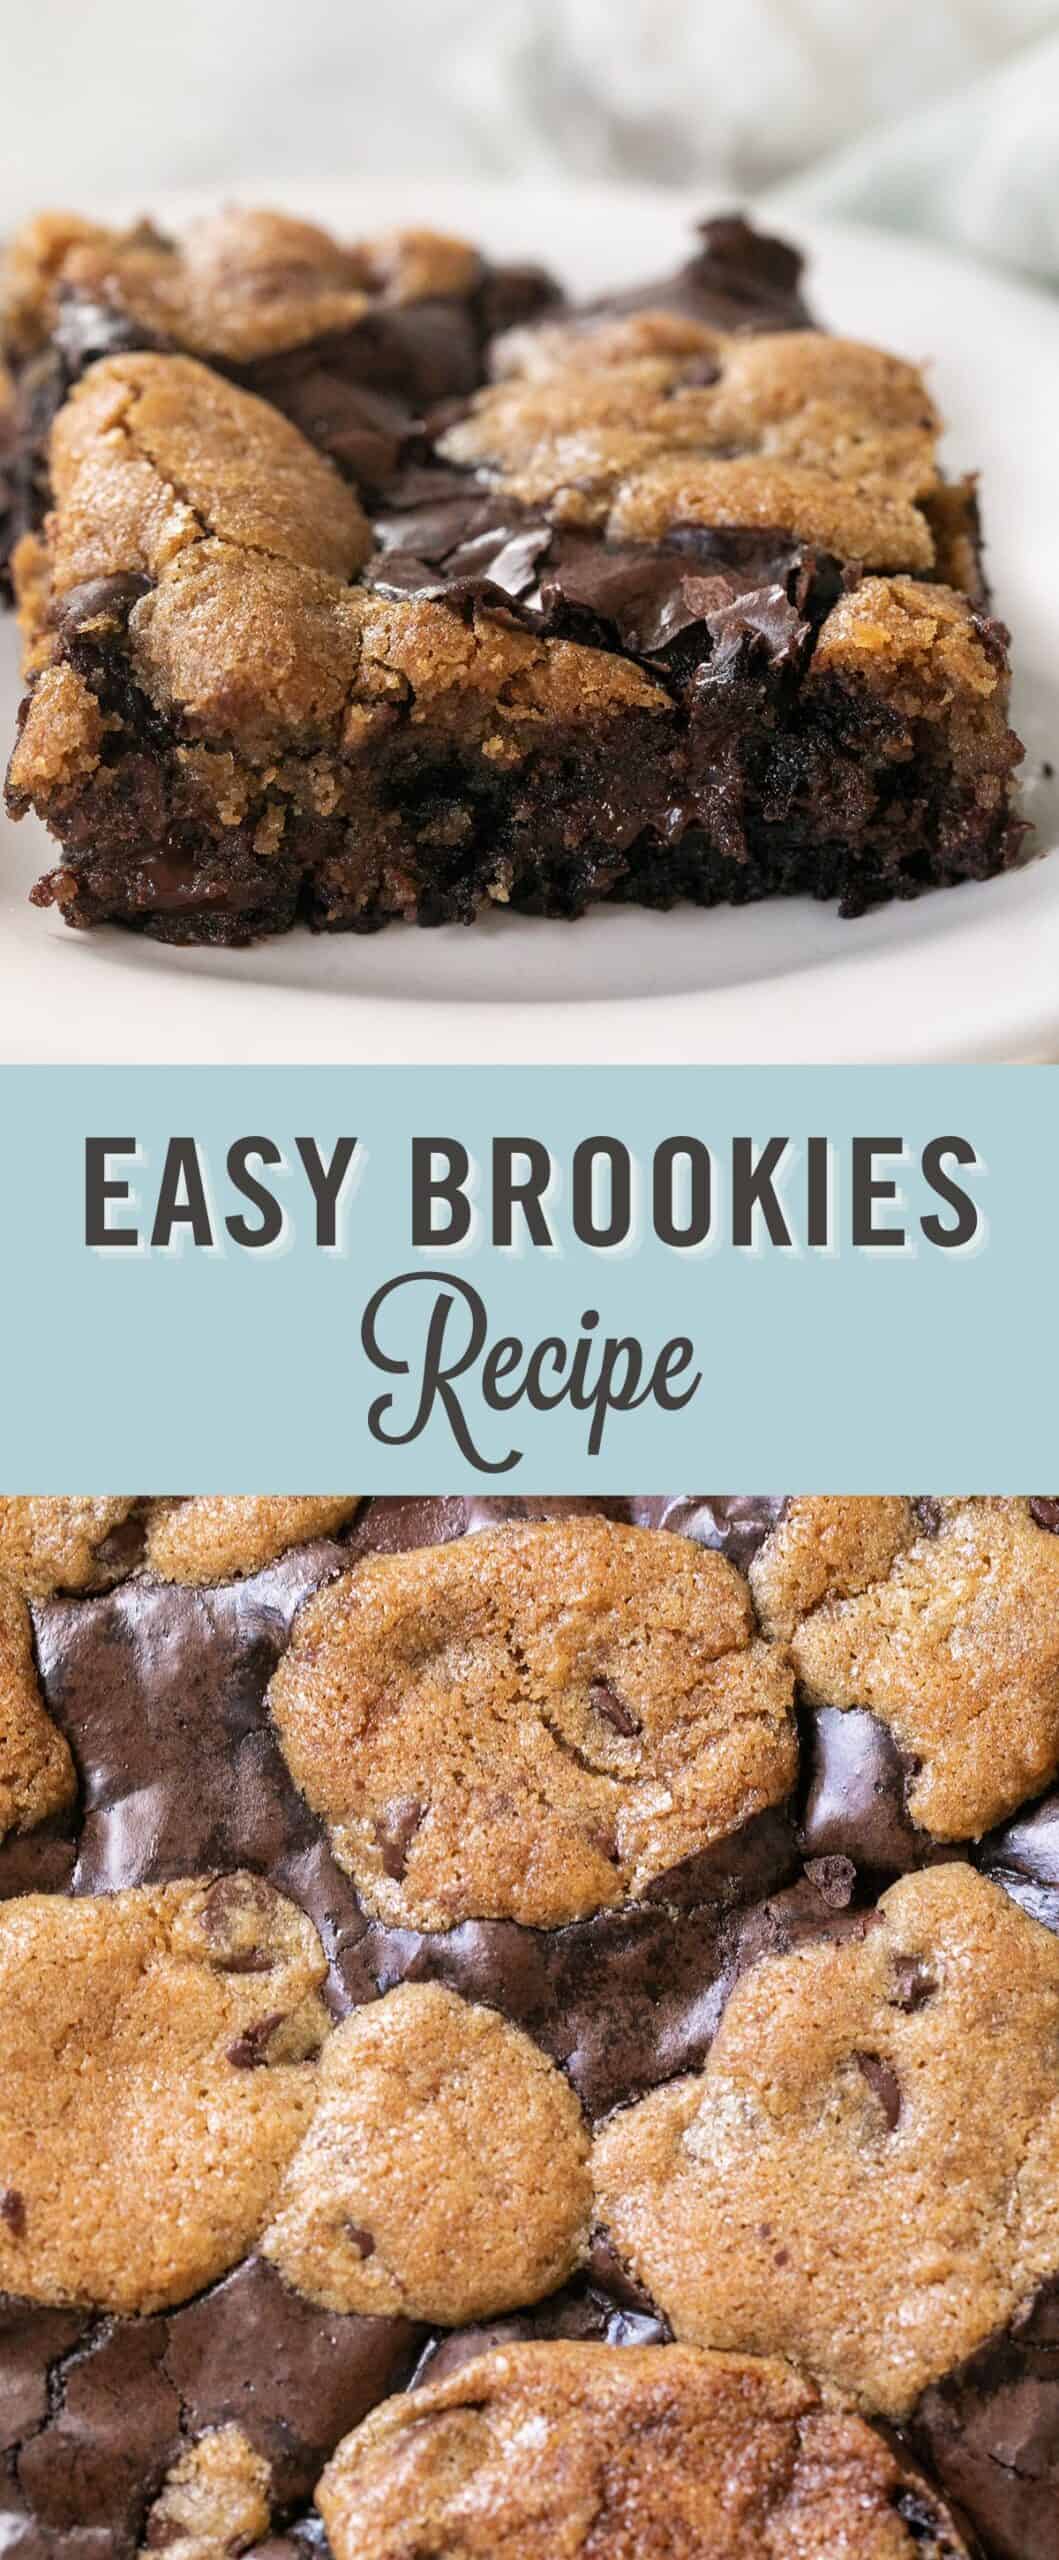 Easy brookies recipe with title.